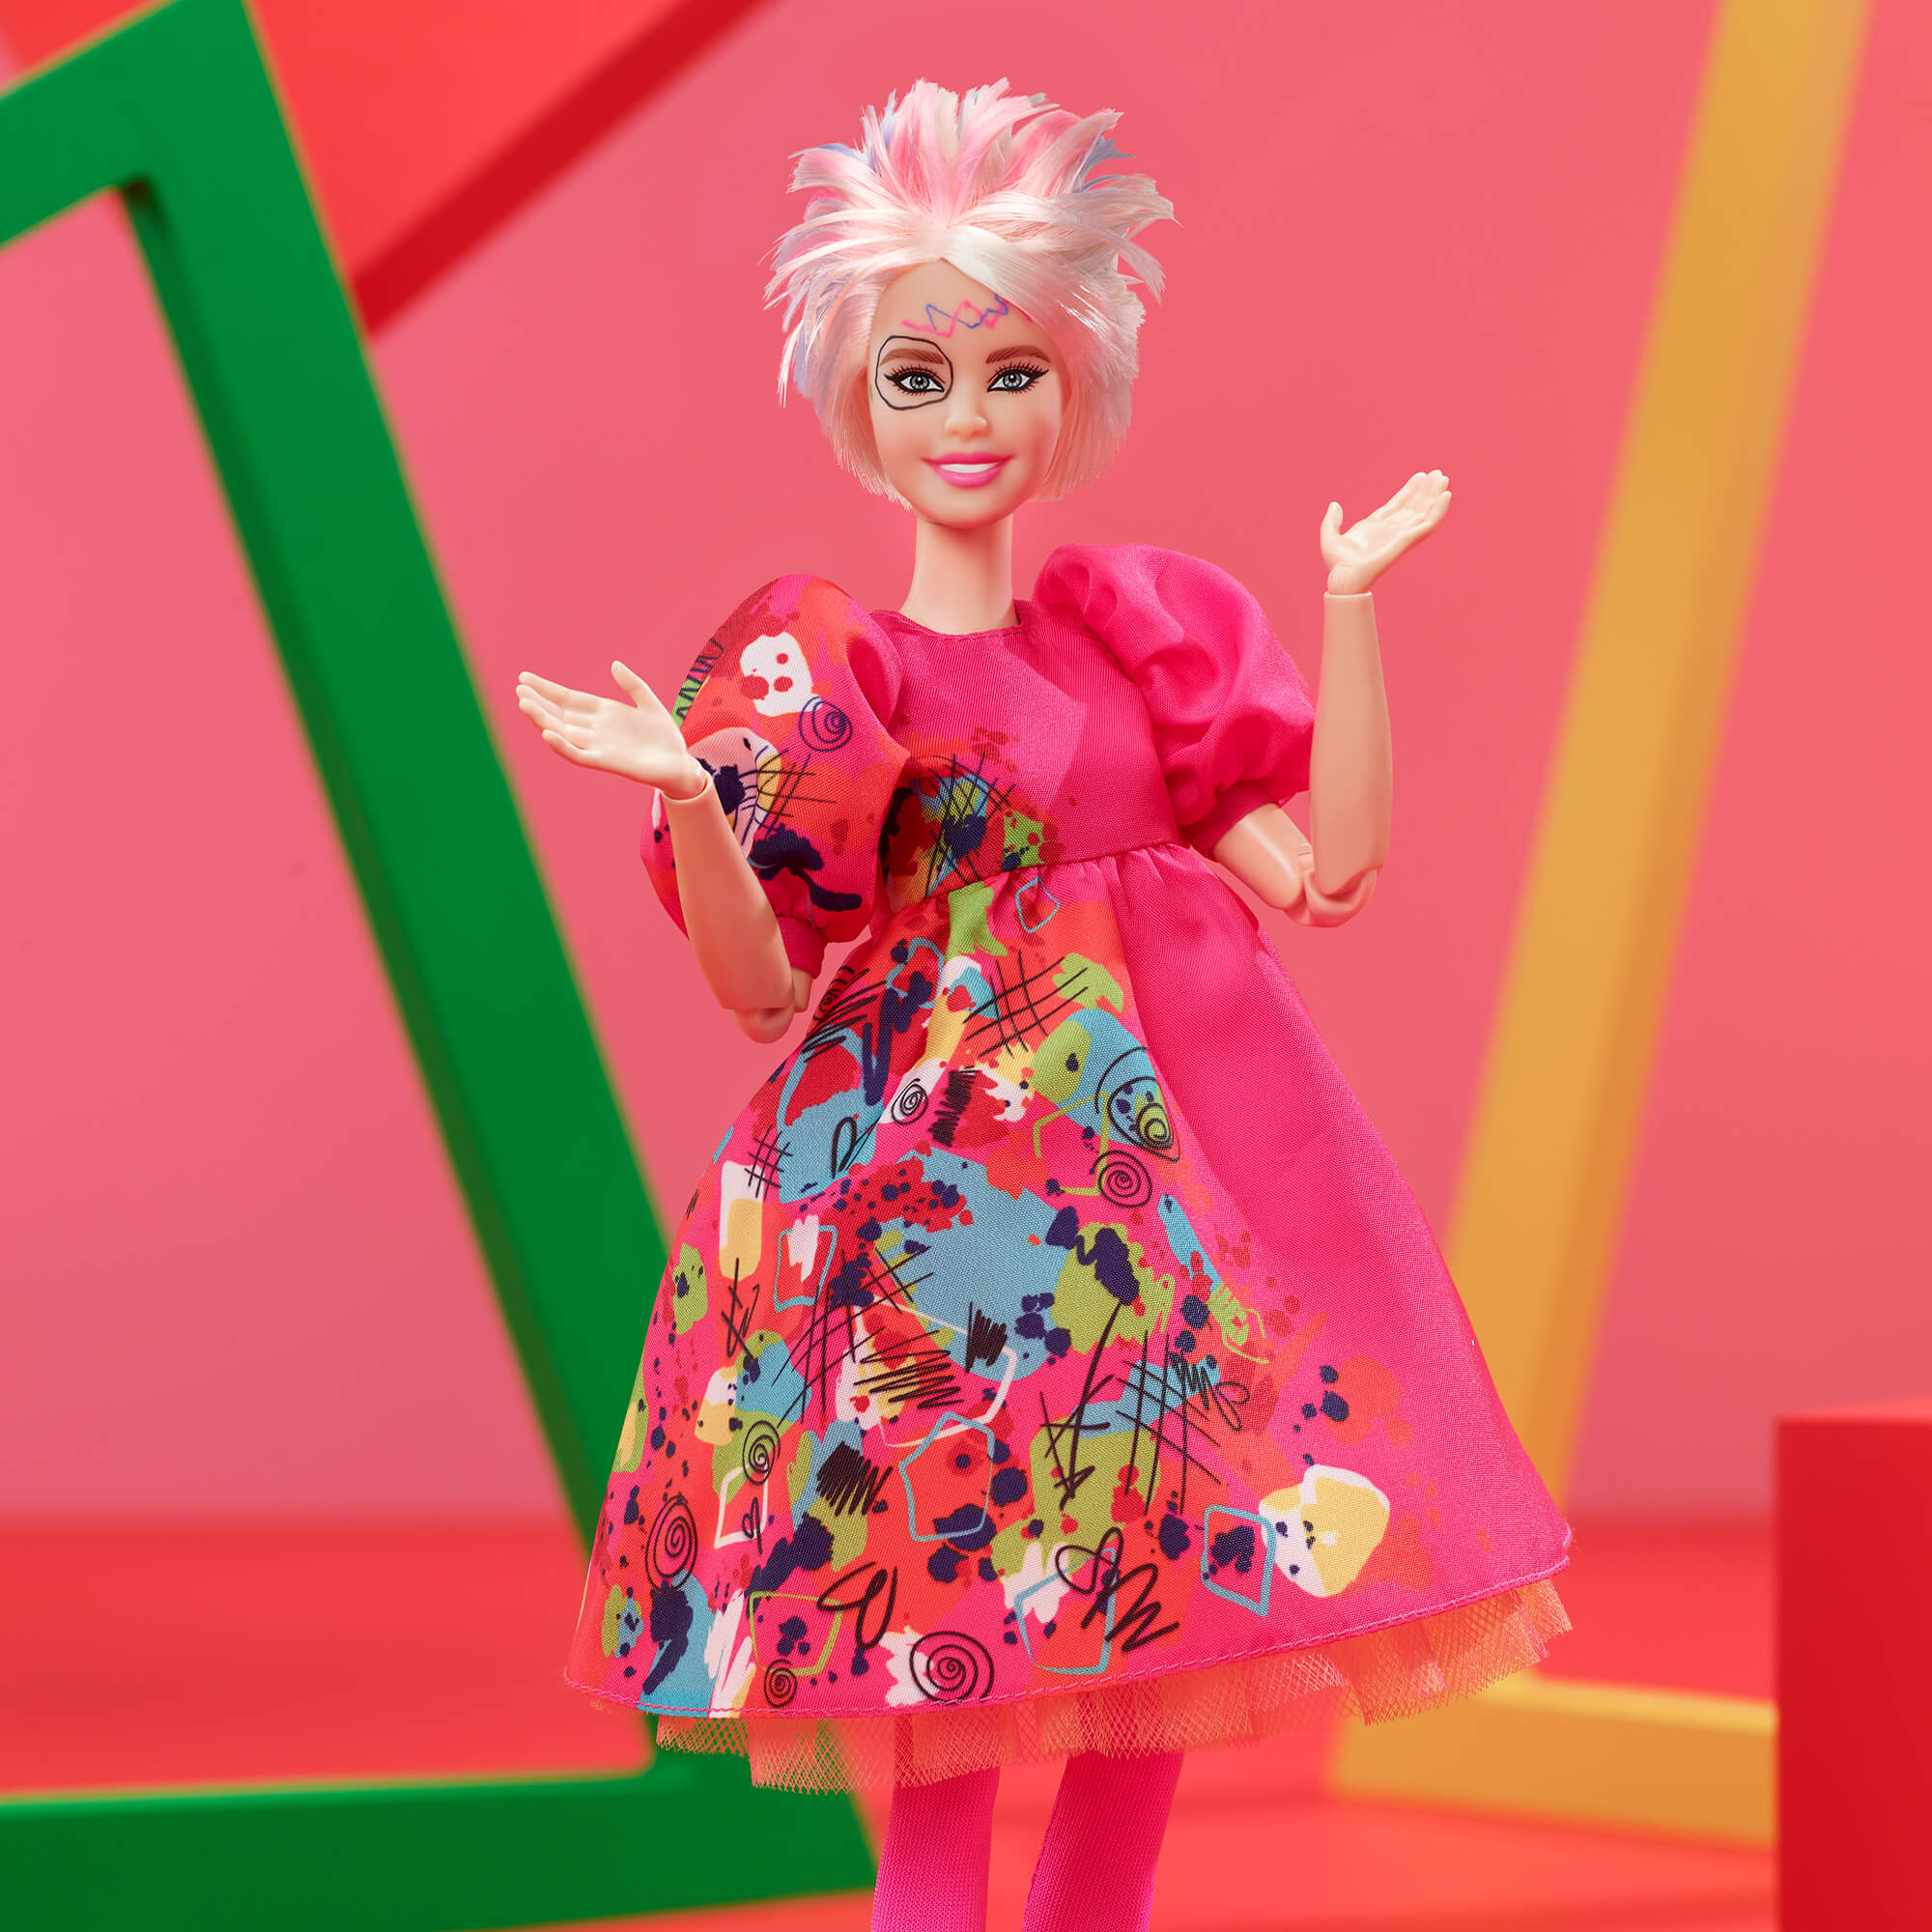 You Can Now Buy 'Weird Barbie' Doll Inspired By The Movie